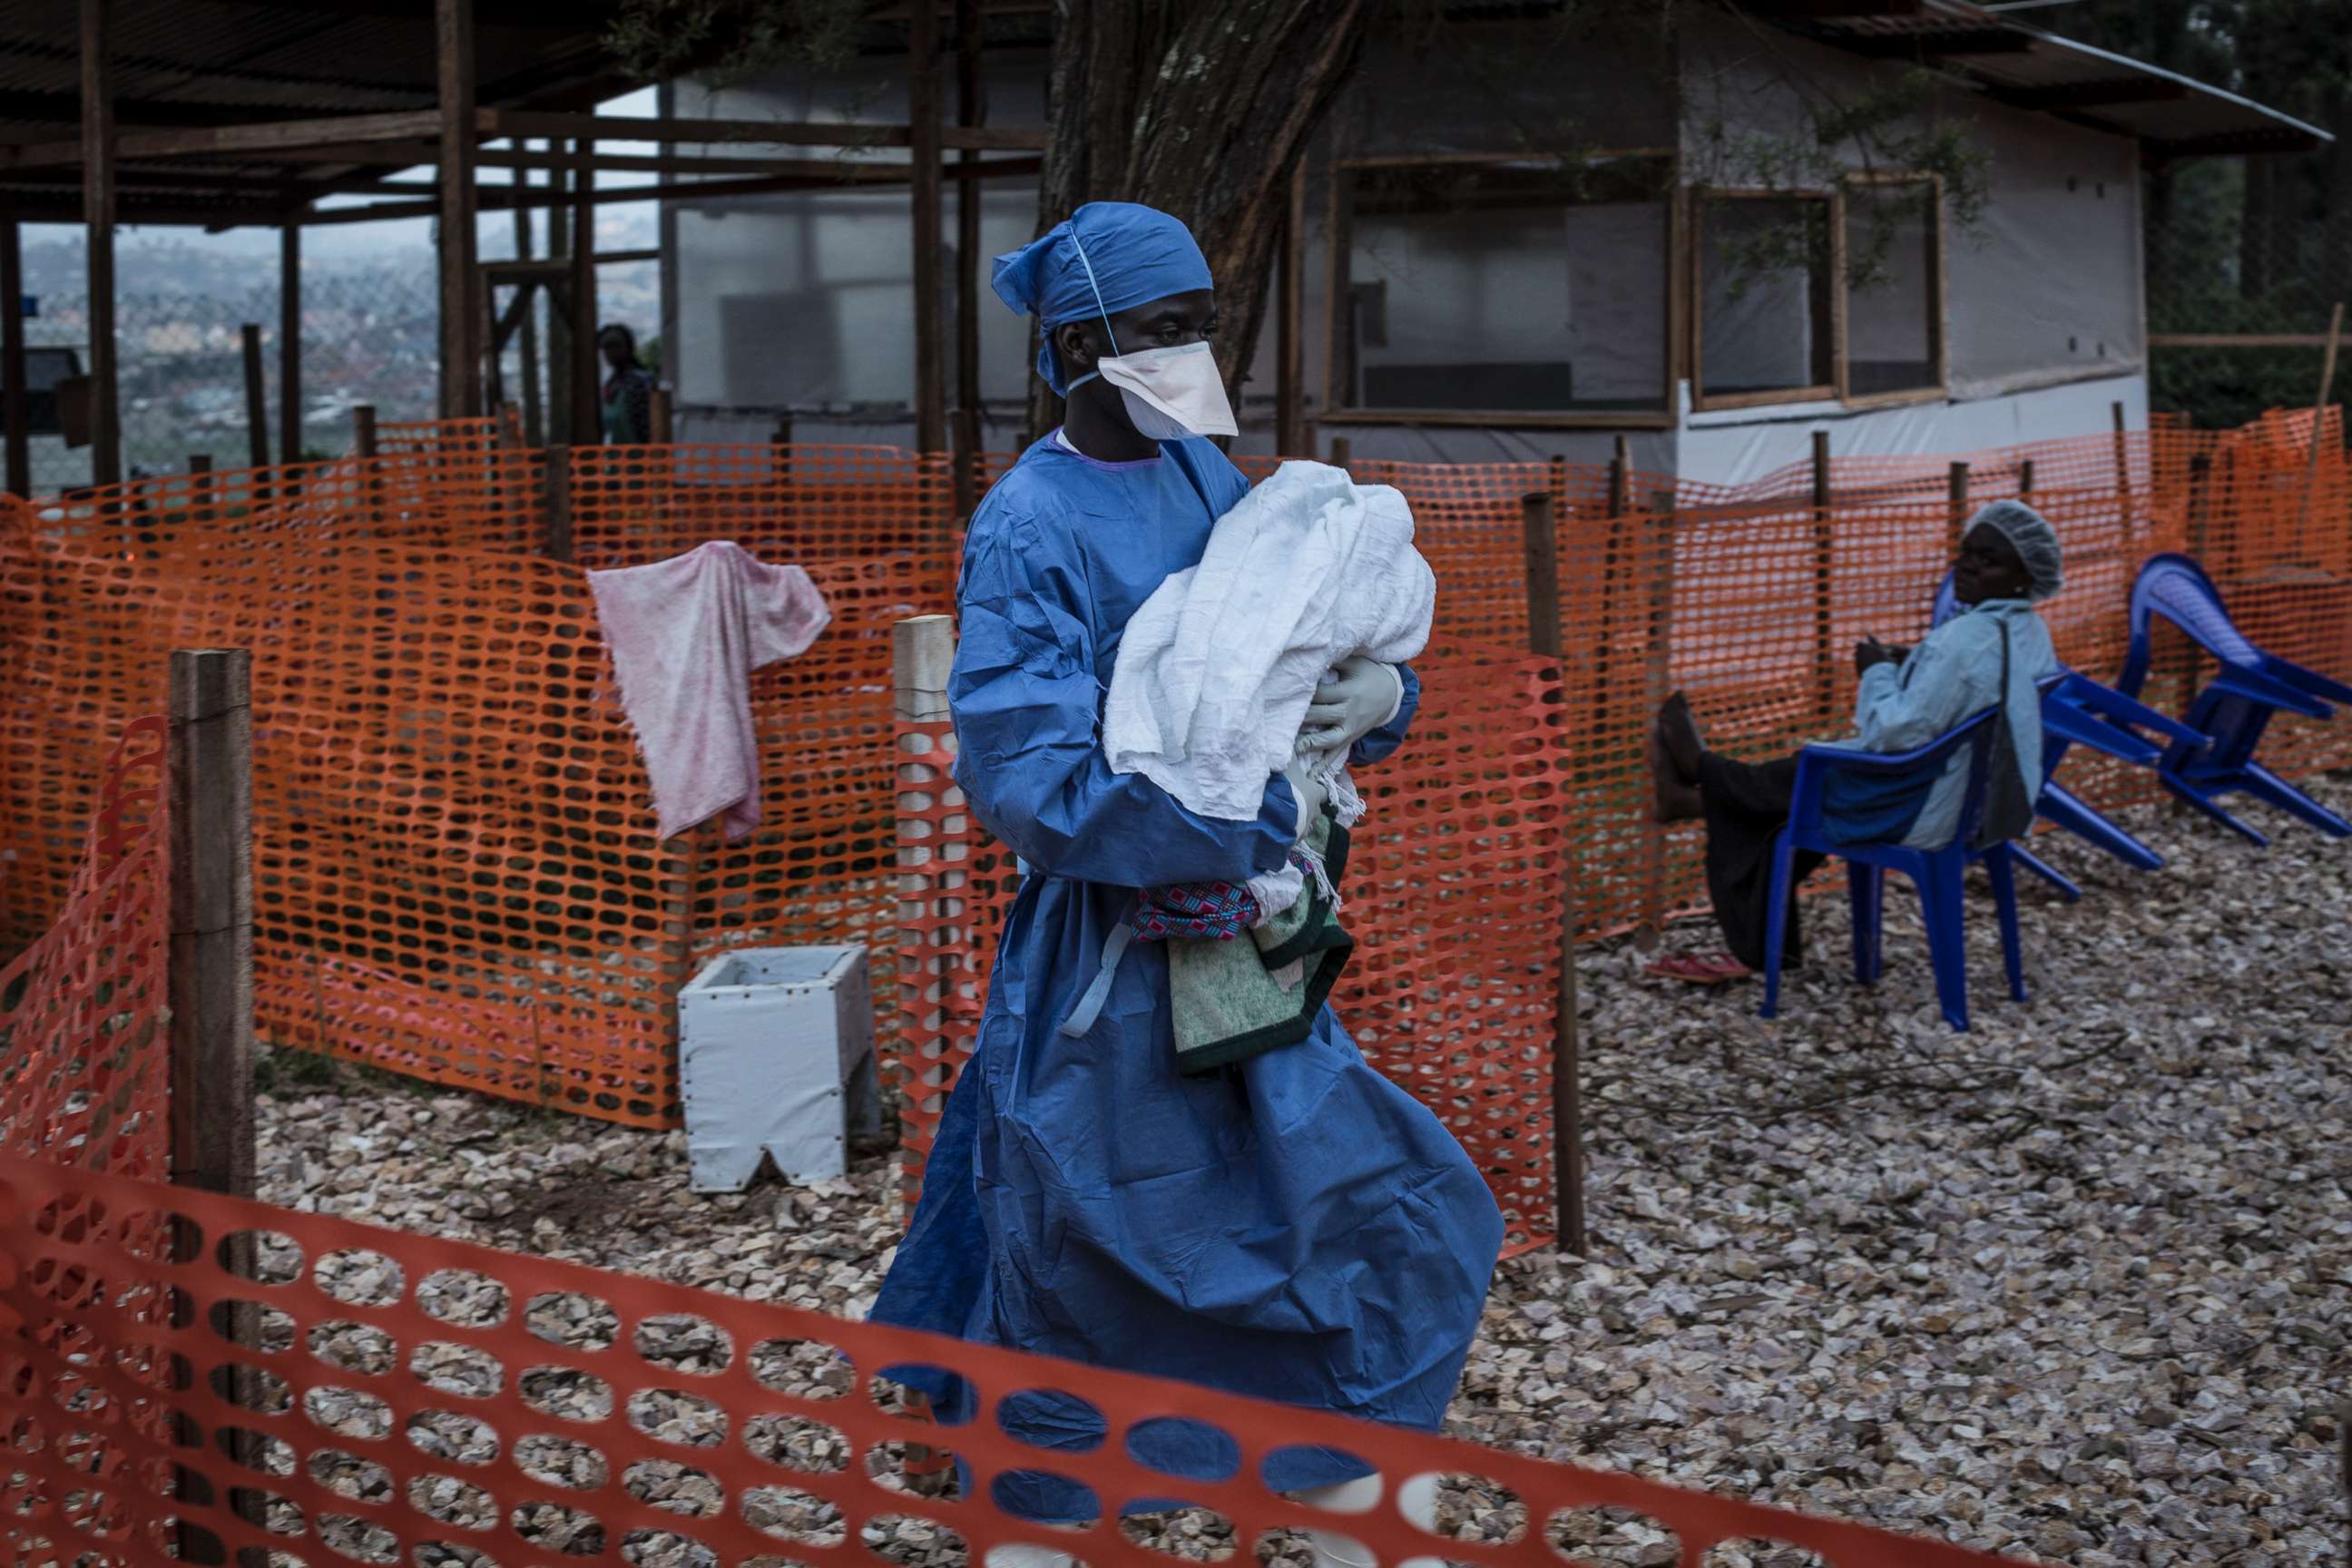 PHOTO: A caretaker already cured of Ebola is seen carrying a four day old baby suspected of having Ebola into a Medecins Sans Frontieres supported Ebola treatment center in Butembo, Congo in this Nov. 4, 2018 file photo.